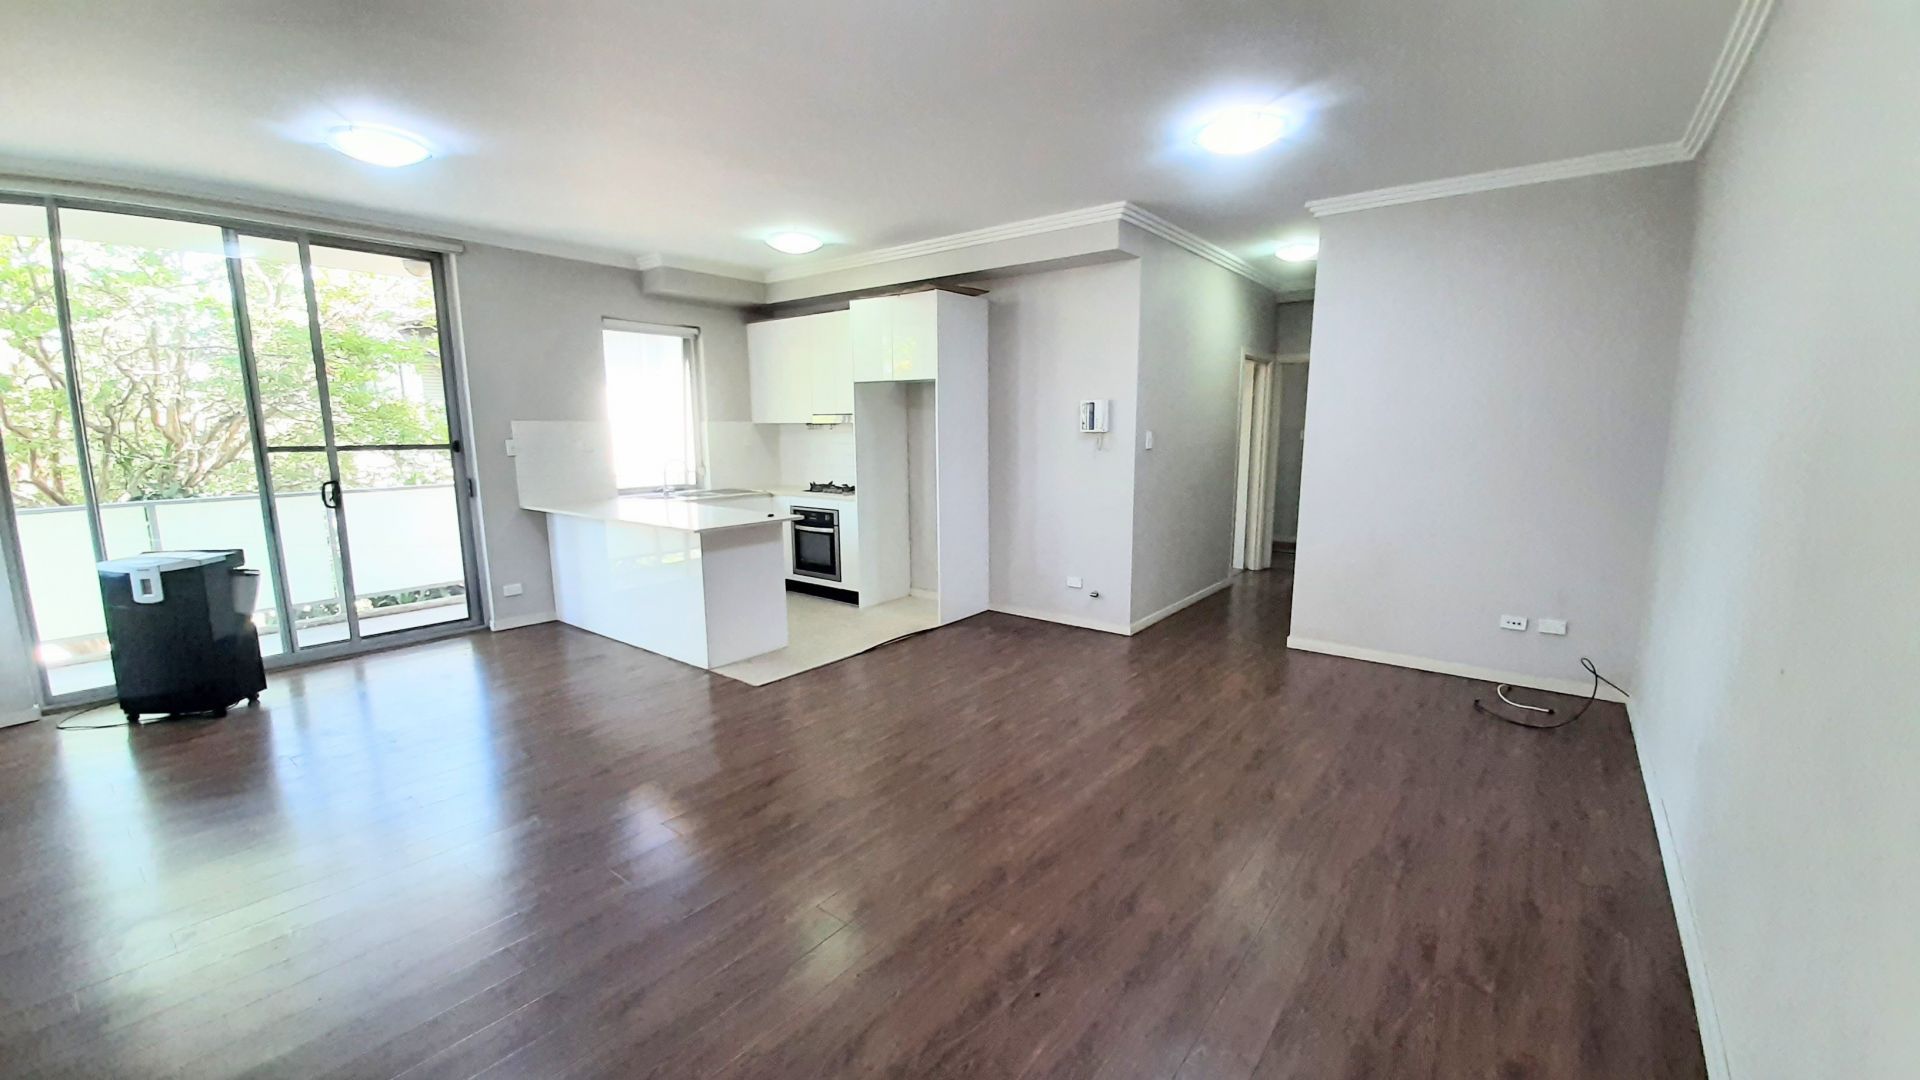 2 bedrooms Apartment / Unit / Flat in 7/92 Liverpool Road BURWOOD HEIGHTS NSW, 2136